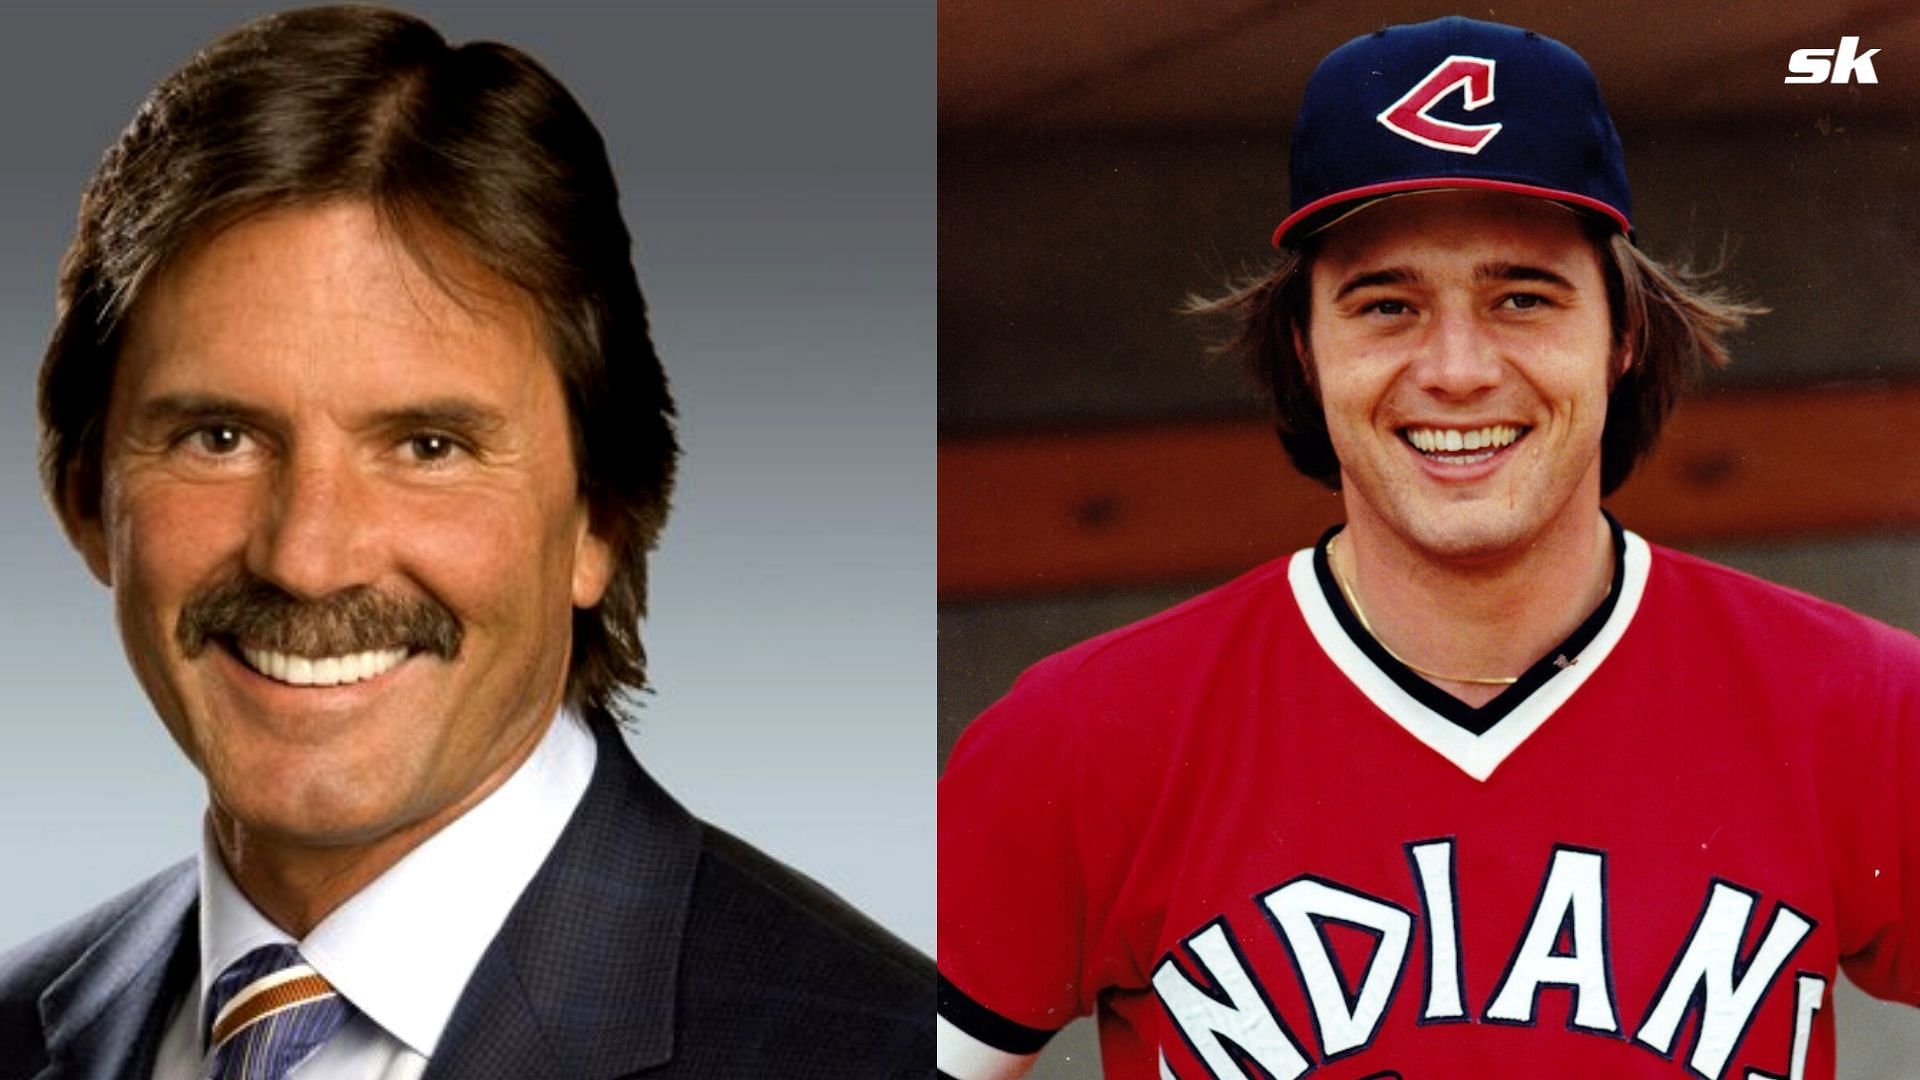 Dennis Eckersley in 2018: I had a real close friend who stole my wife. How  about that?